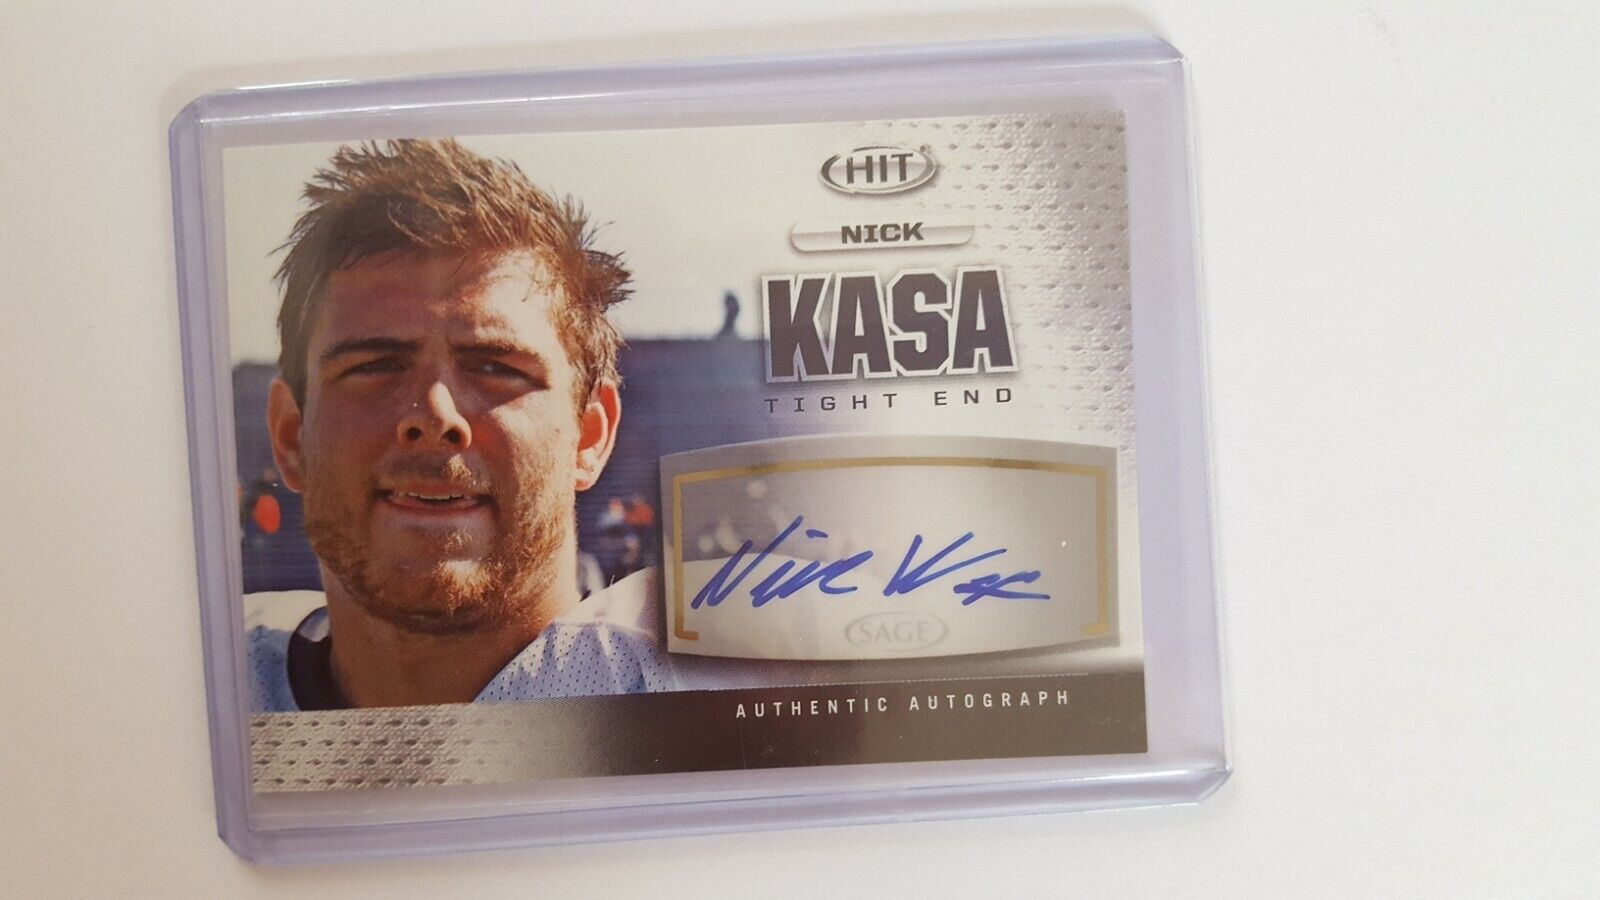 2013 SAGE HIT ROOKIE AMERICAN FOOTBALL AUTO CARD NICK KASA A144. rookie card picture